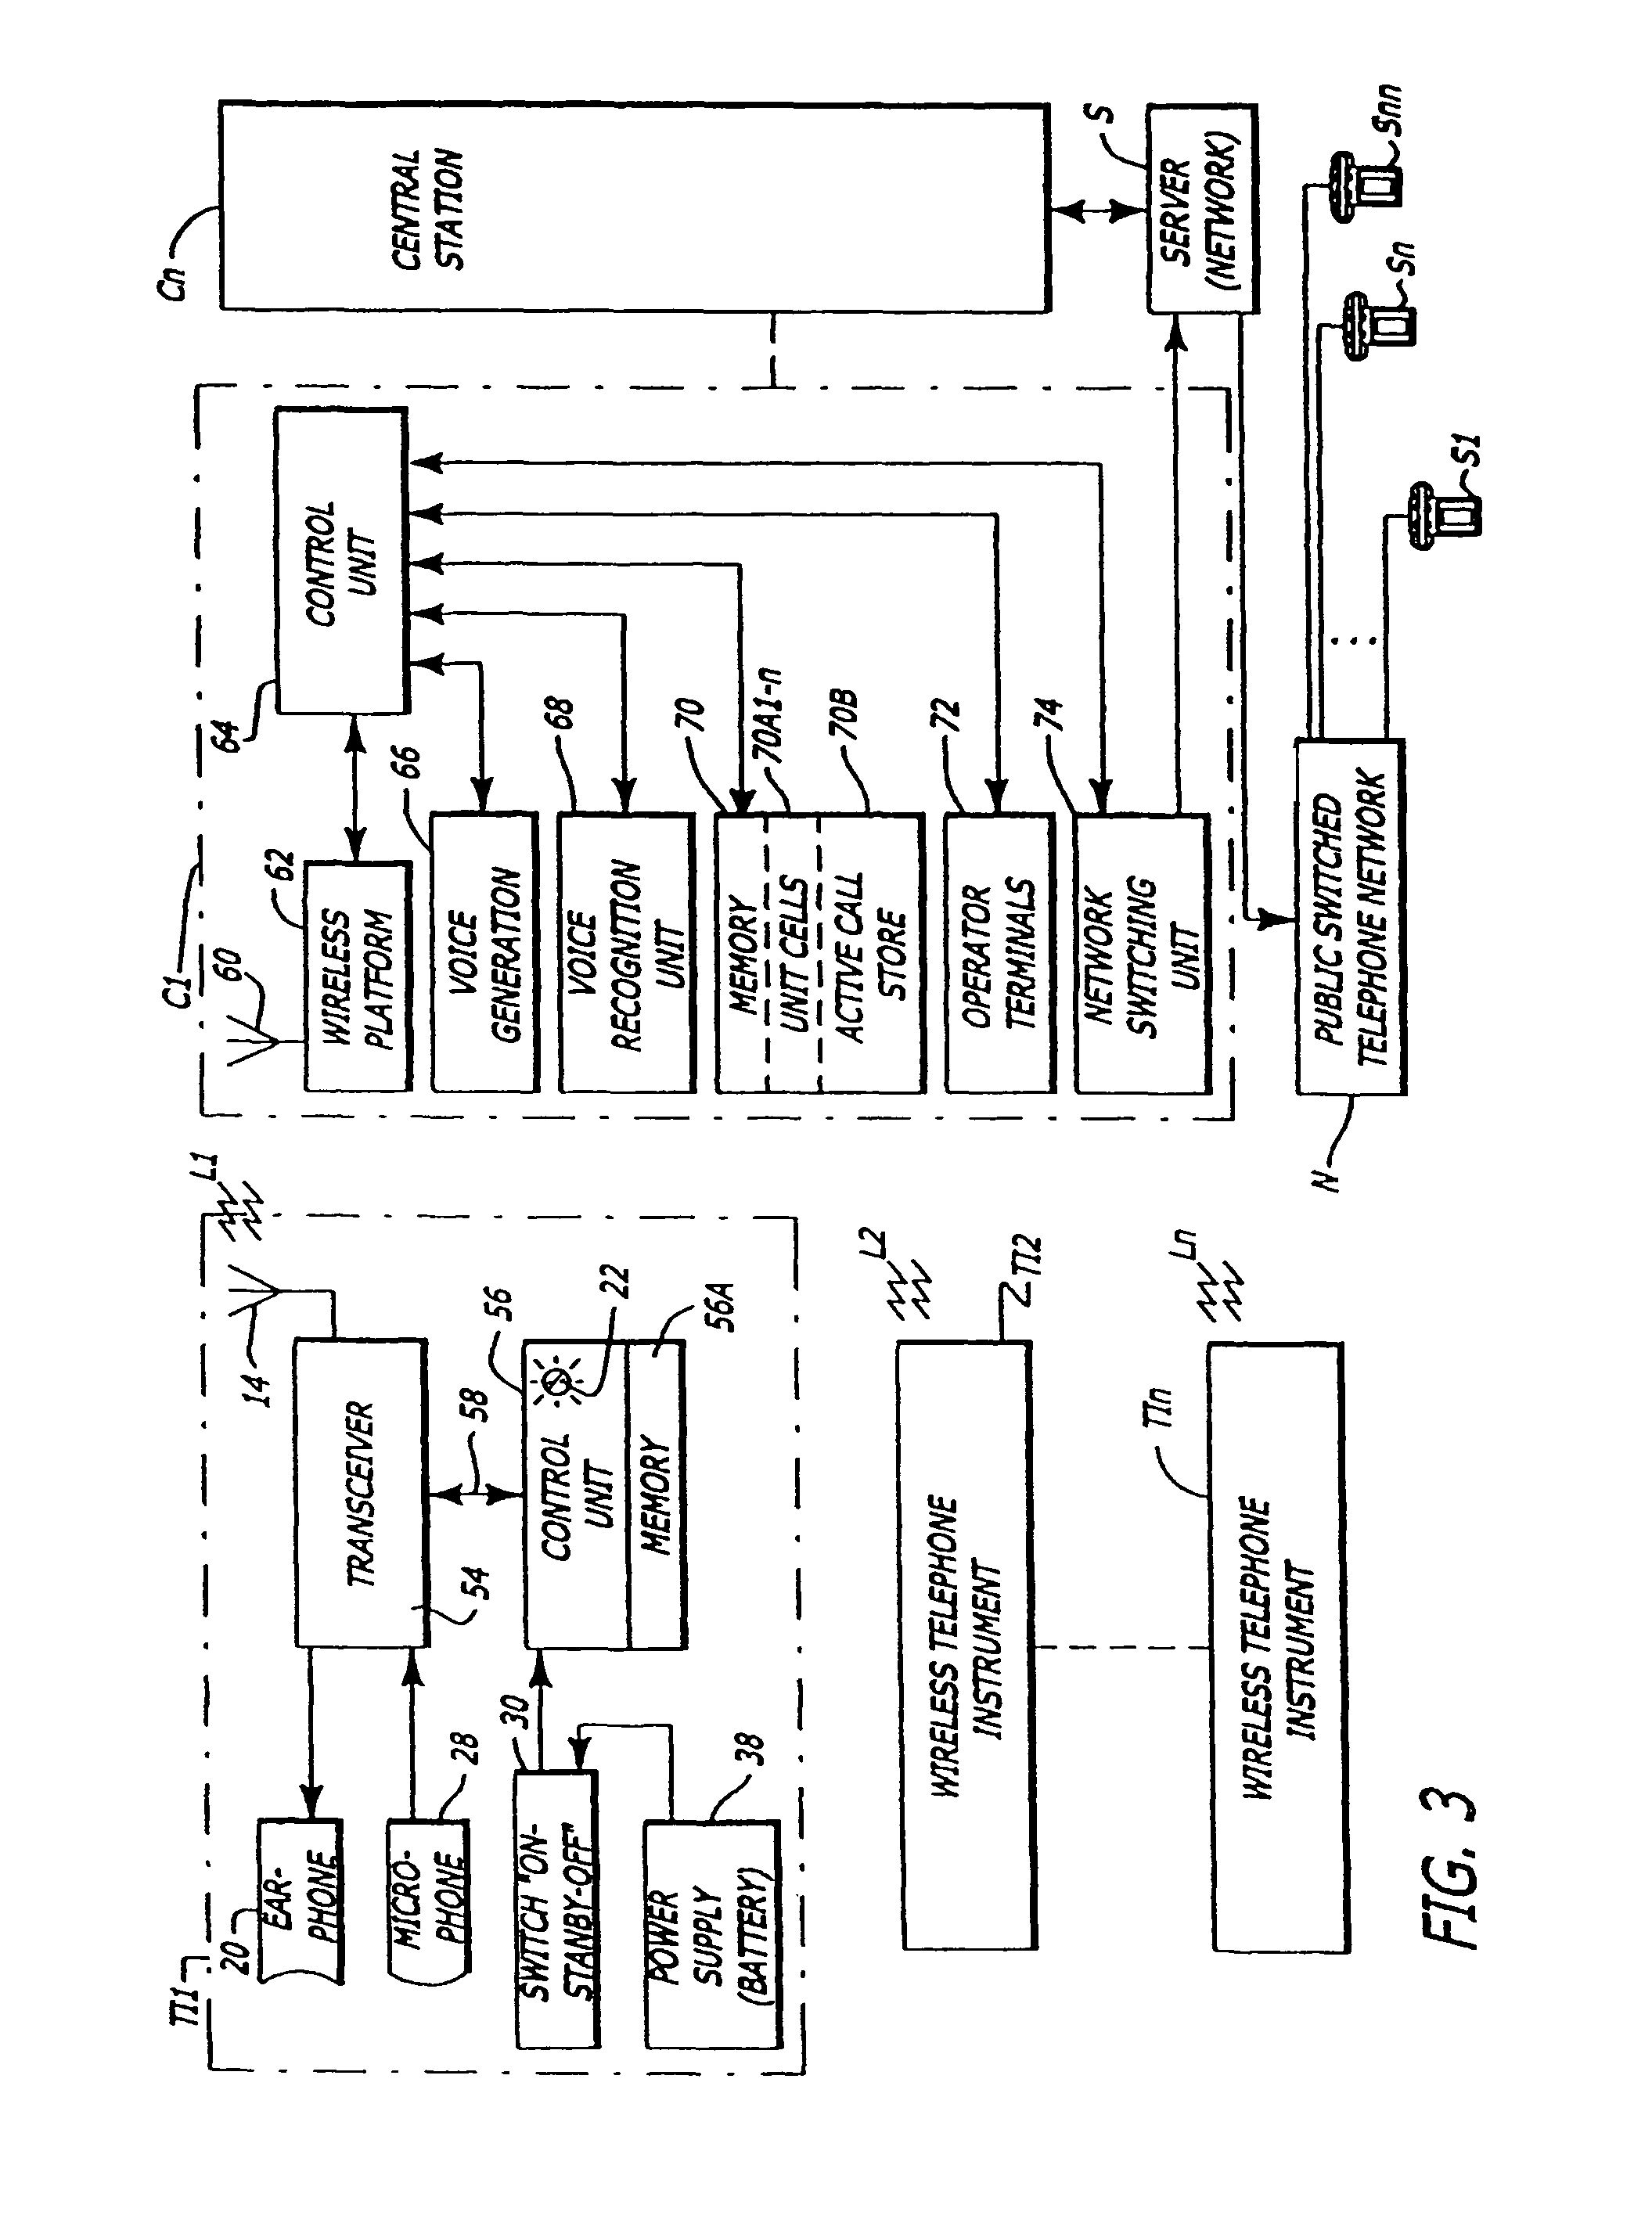 Wireless telephone communication for individual callers to contact remote telephone terminals through a public switched telephone network